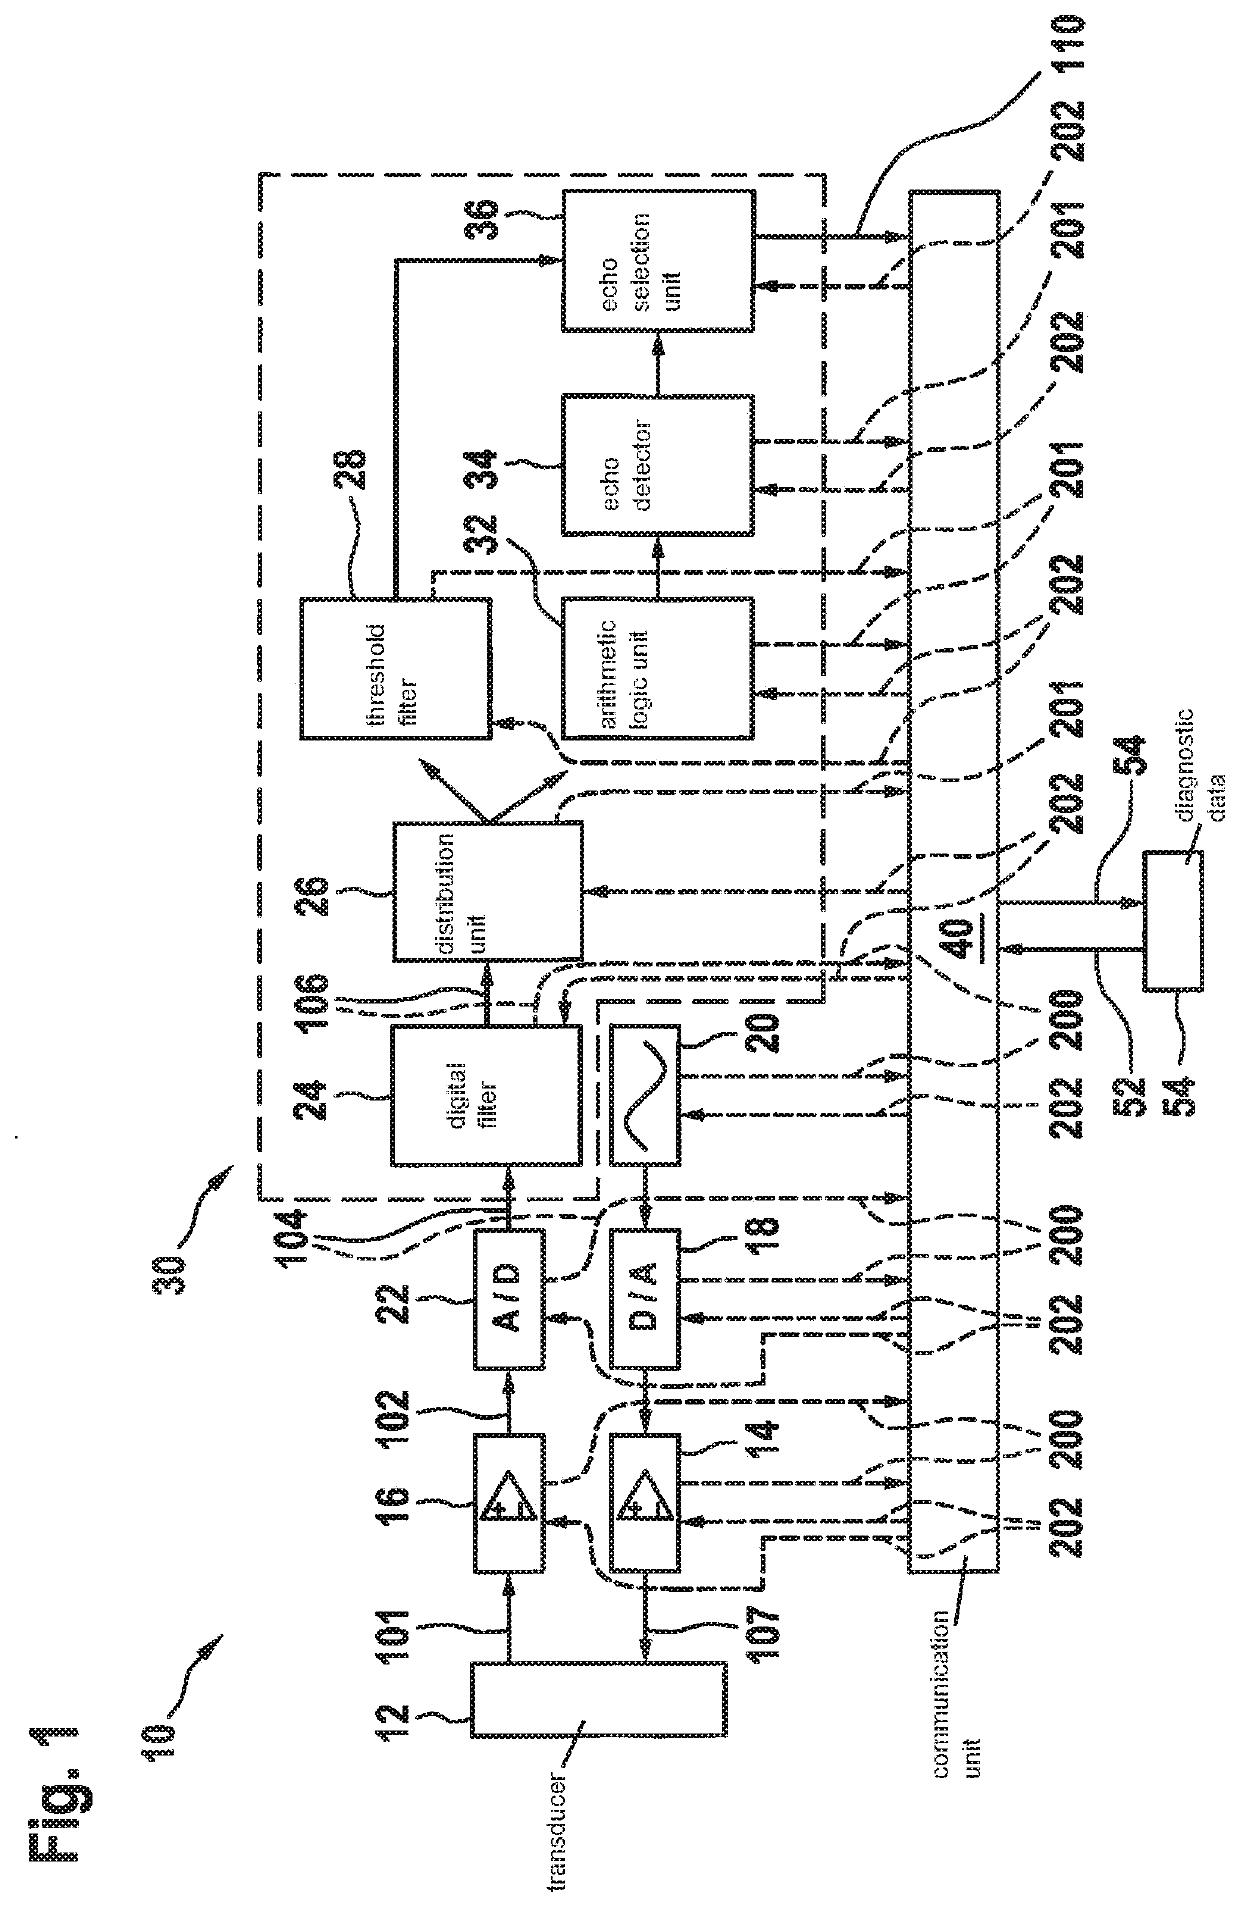 Sensor for emitting signals and for receiving reflected echo signals, and system including a control unit and such a sensor